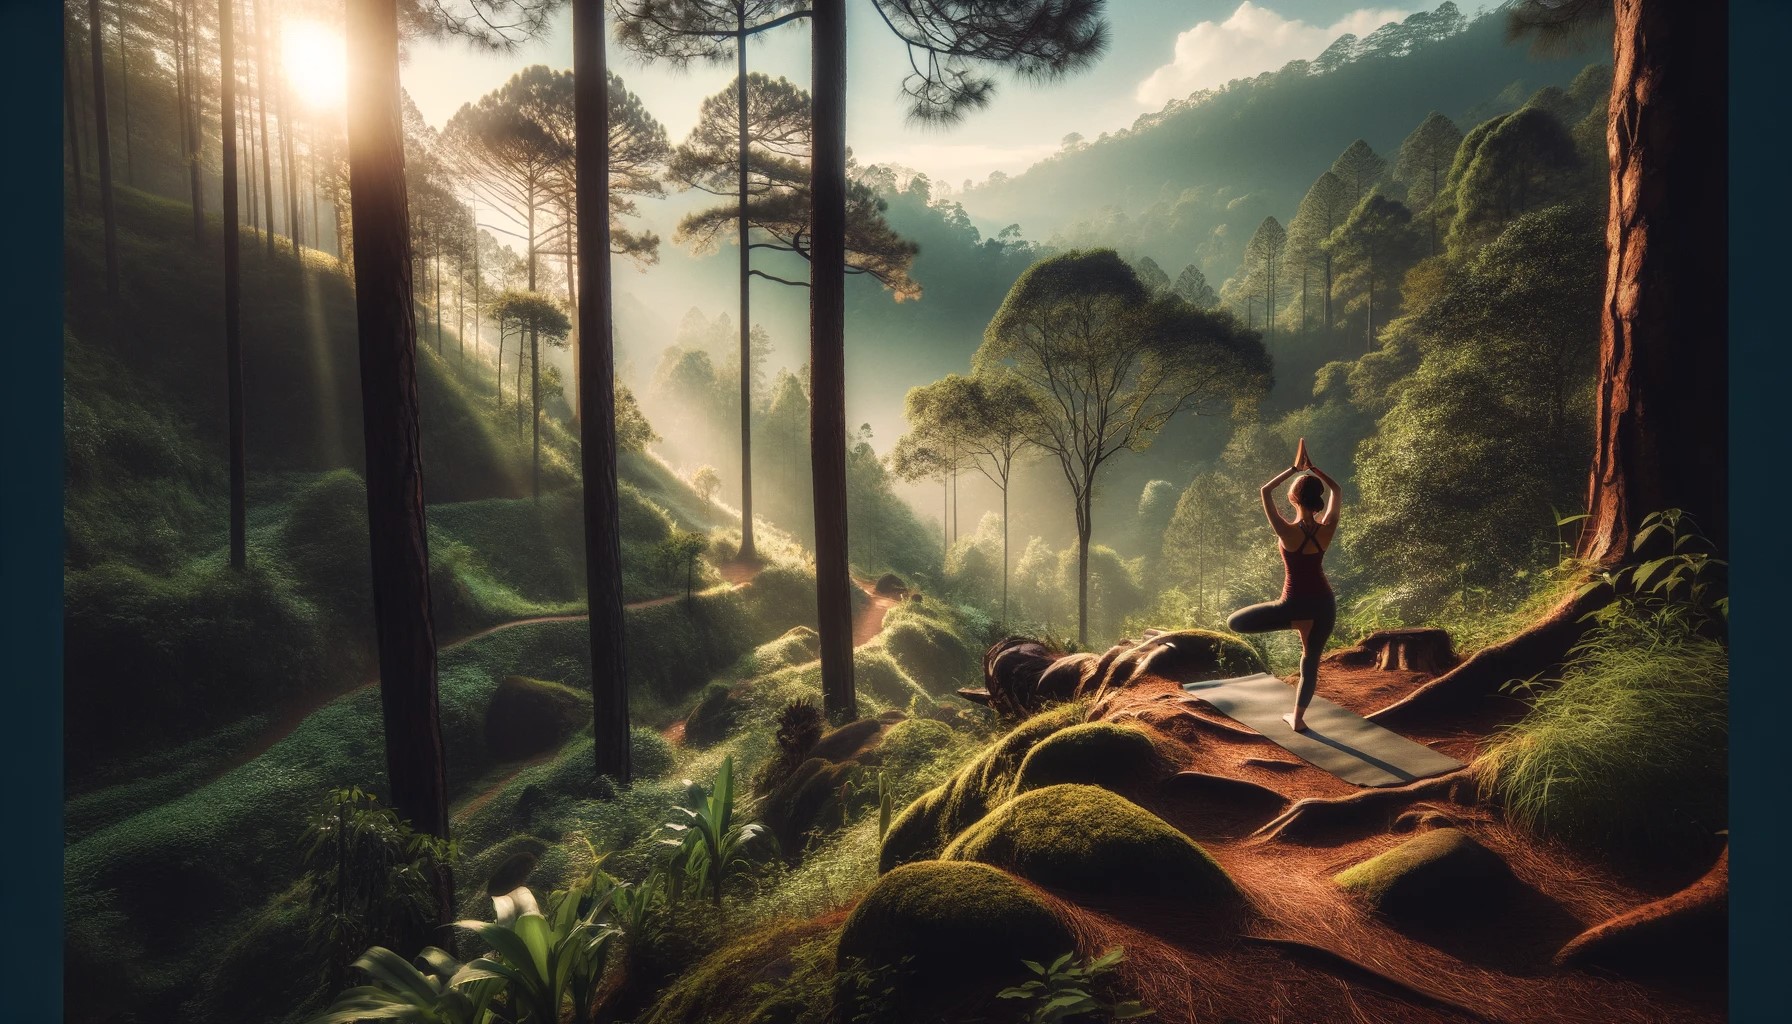 An image capturing the serene practice of trail yoga in a natural setting. The scene features a person doing yoga on a scenic hiking trail